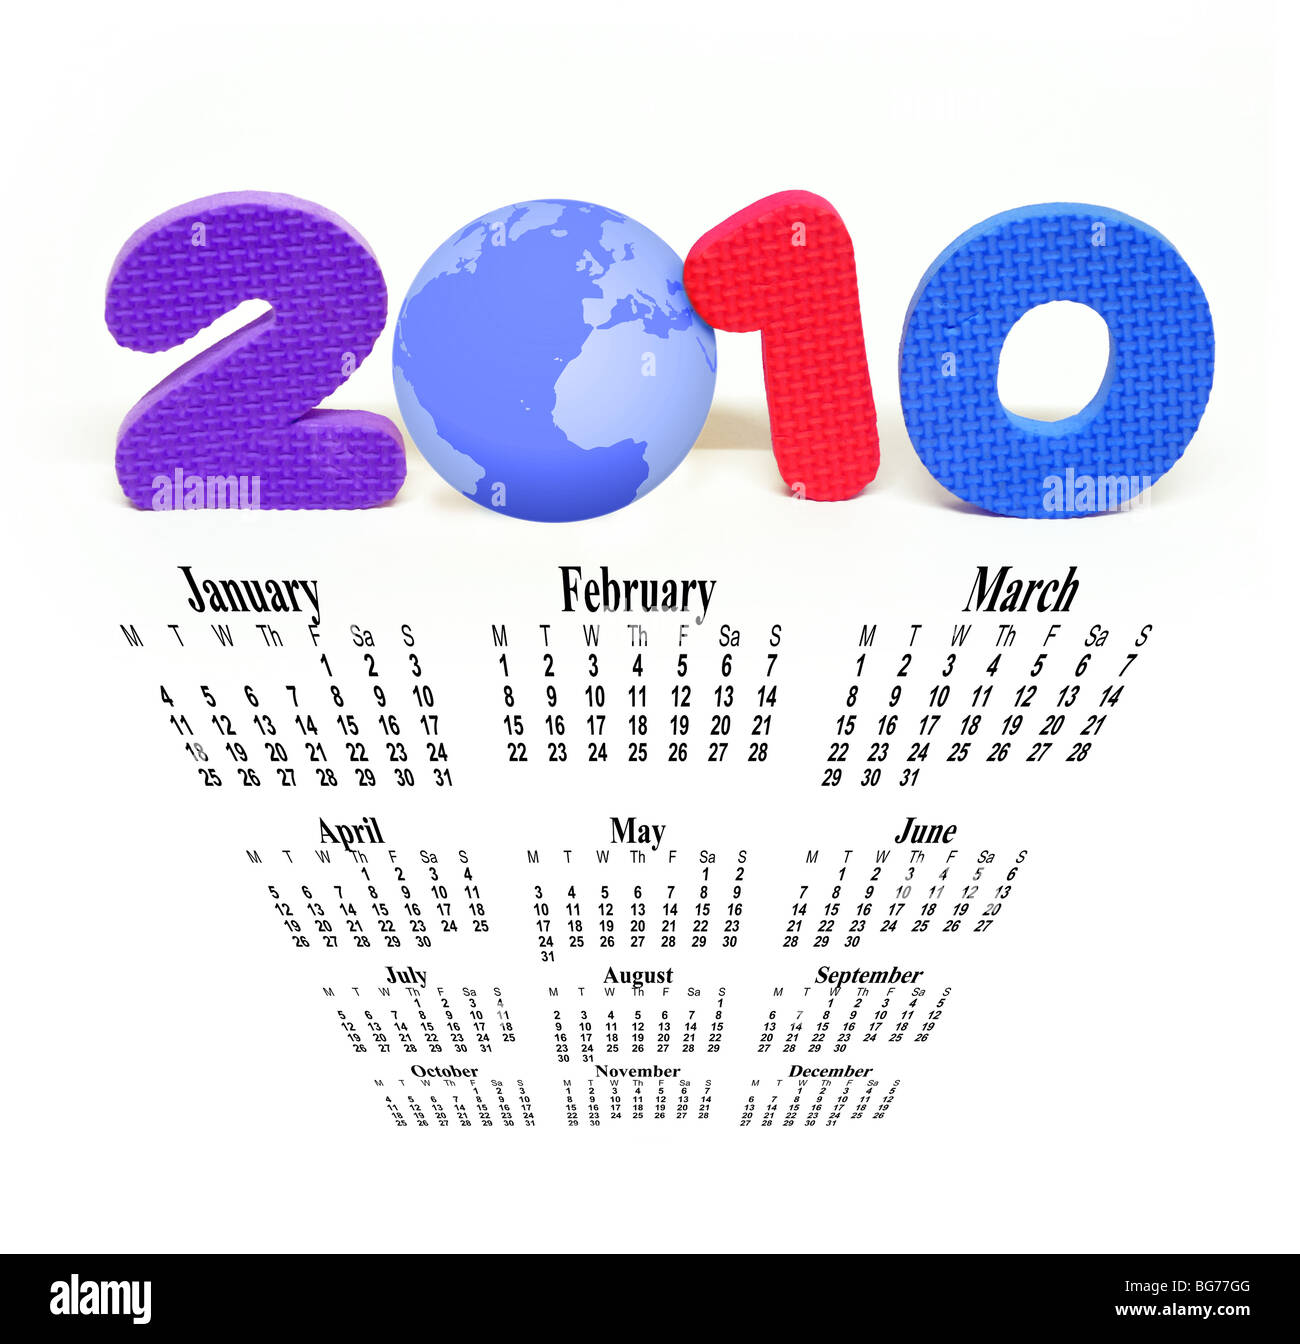 The year 2010 made up with plastic numbers and planet earth with a descending view of the months of the year. Stock Photo